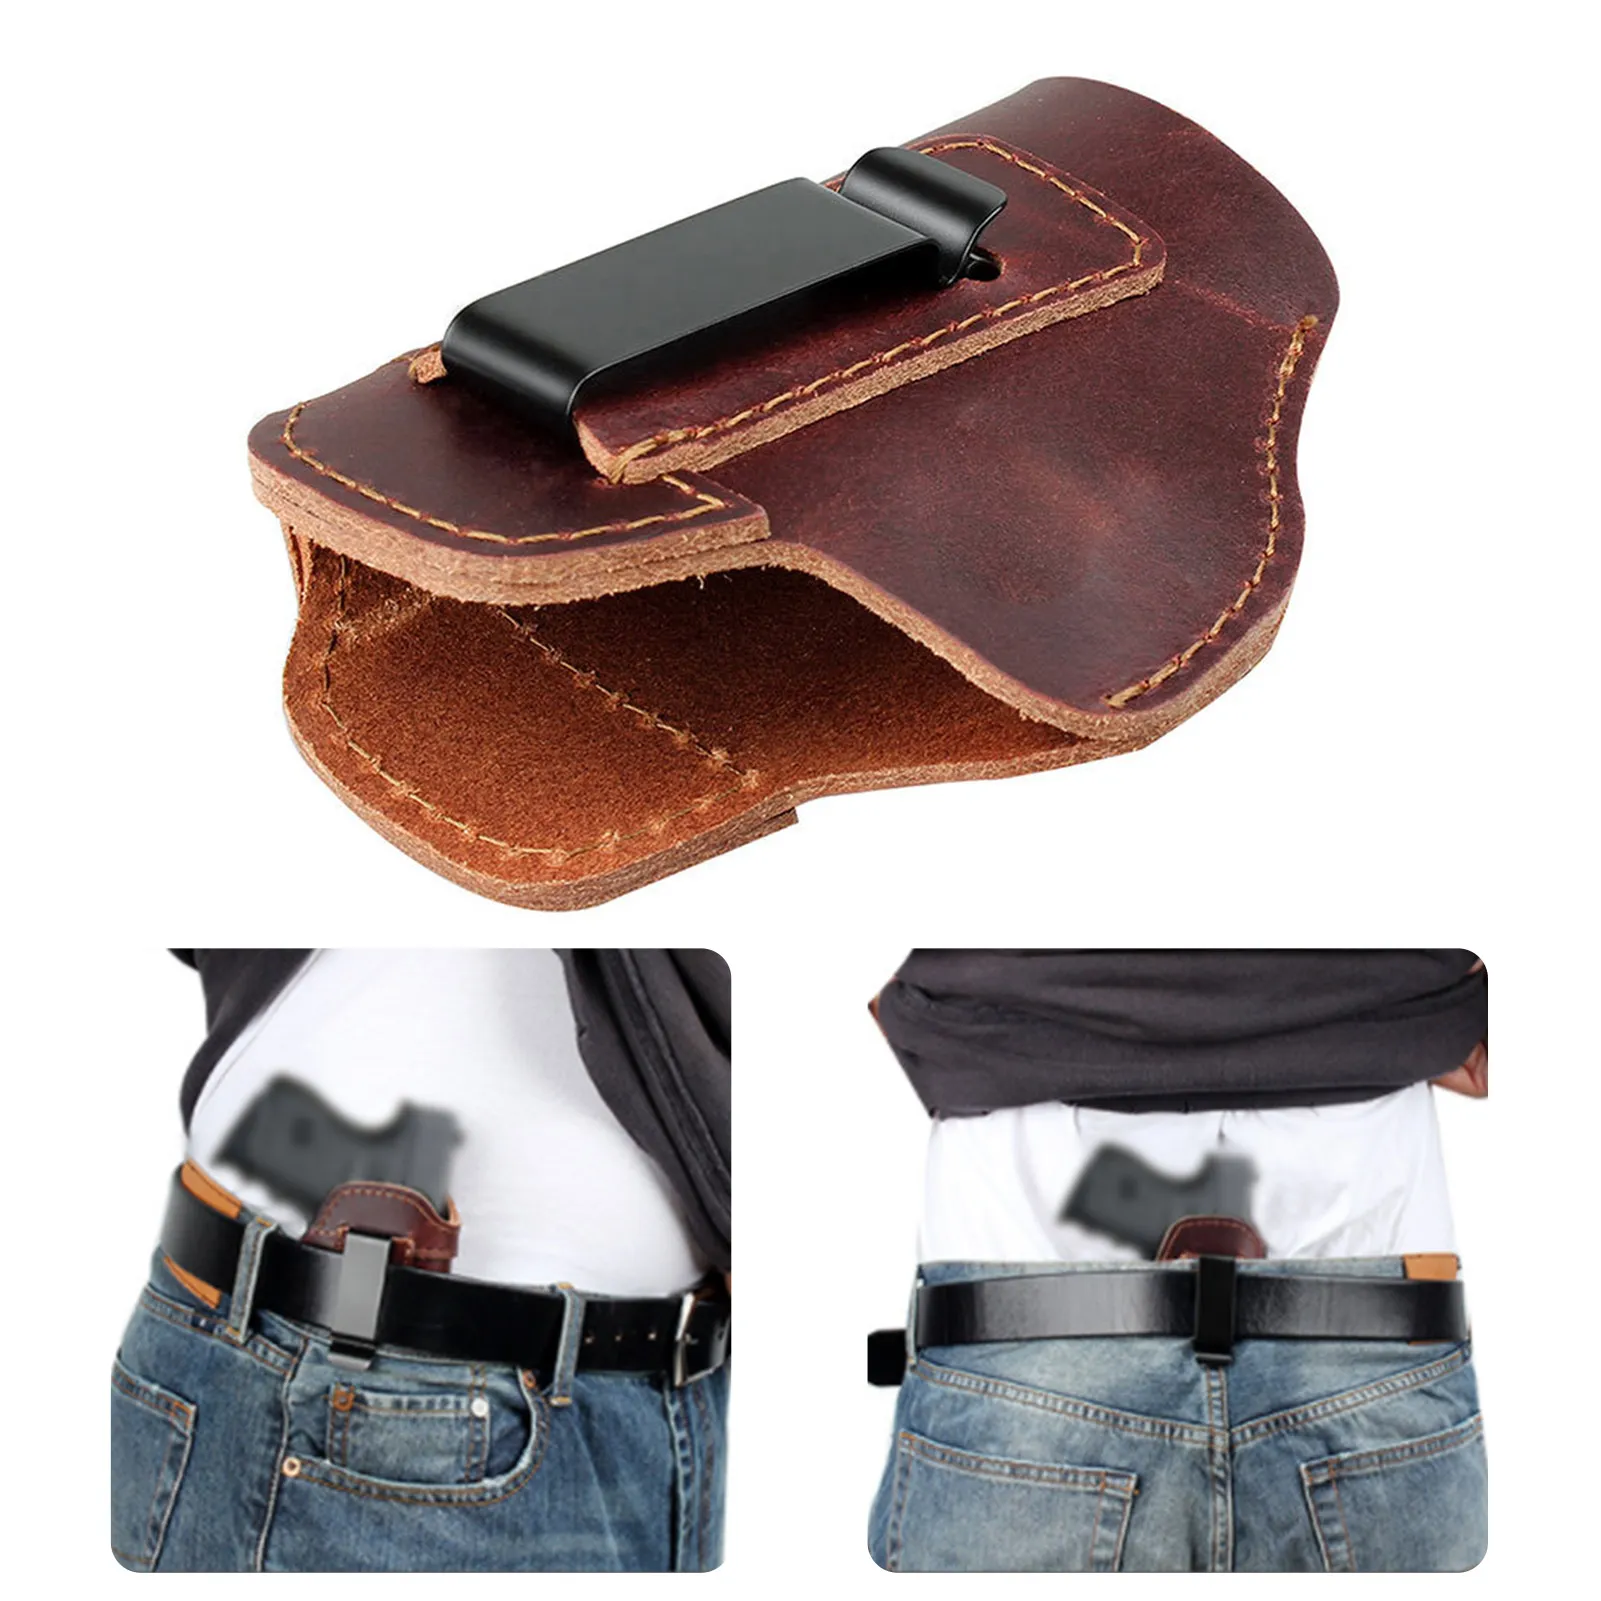 Tactical Cowhide Leather Holster For Taurus G2C Sig Sauer P226 SP2022 ...